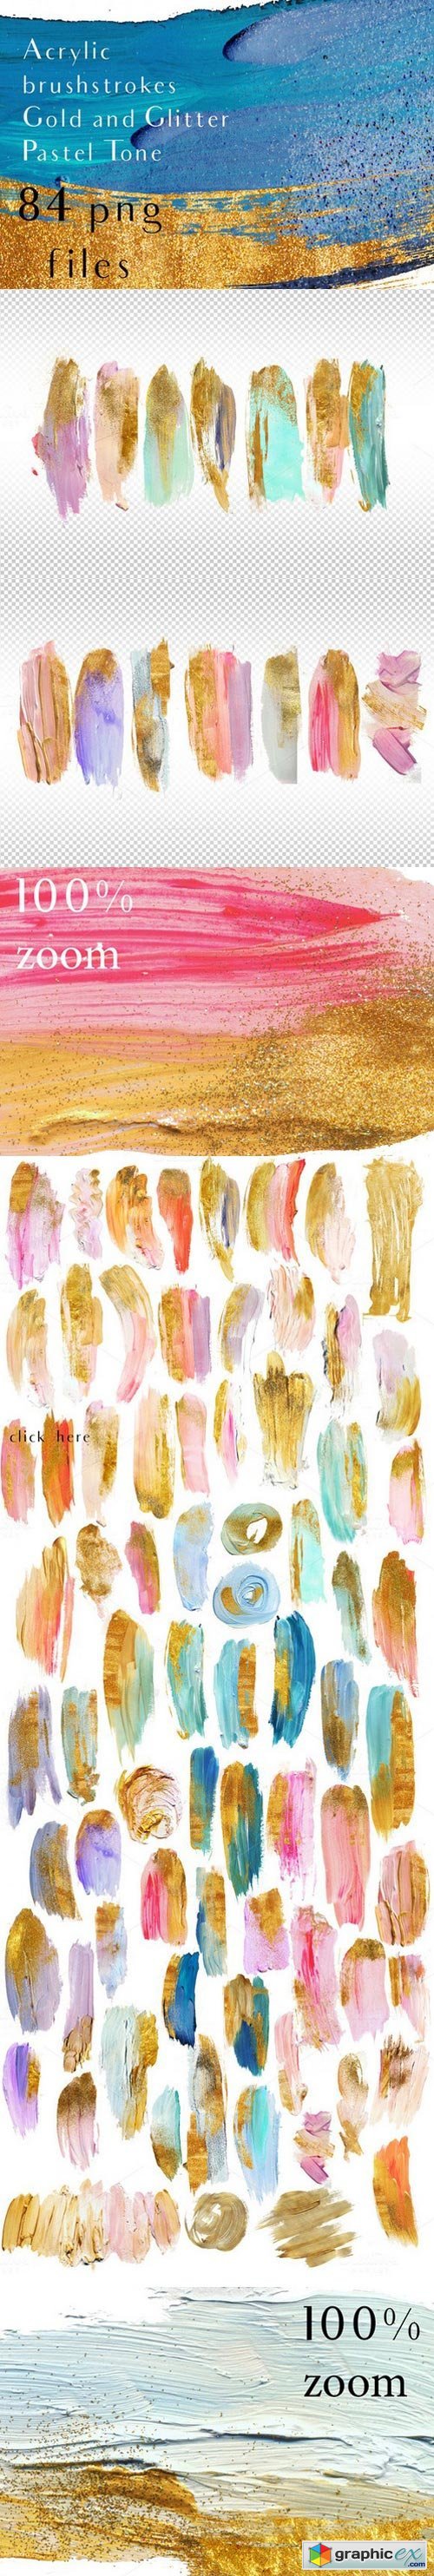 Acrylic brushstrokes of GOLD!84 png